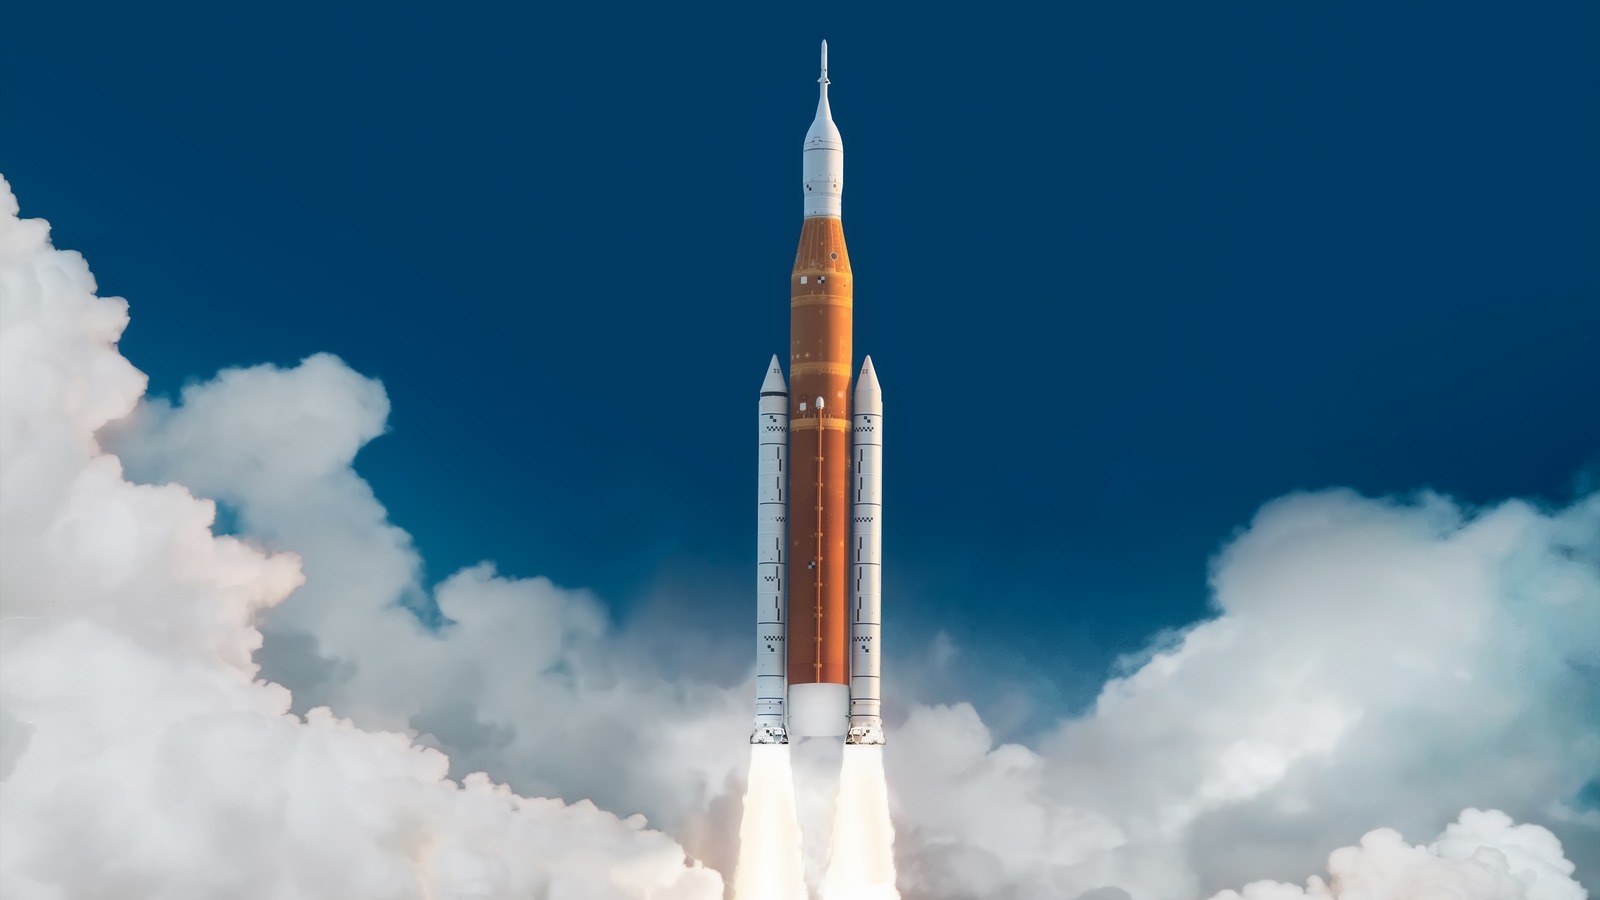 NASA Announces Plans For Nuclear-Powered Rocket With In-Space Tests As Soon As 2027 – SlashGear